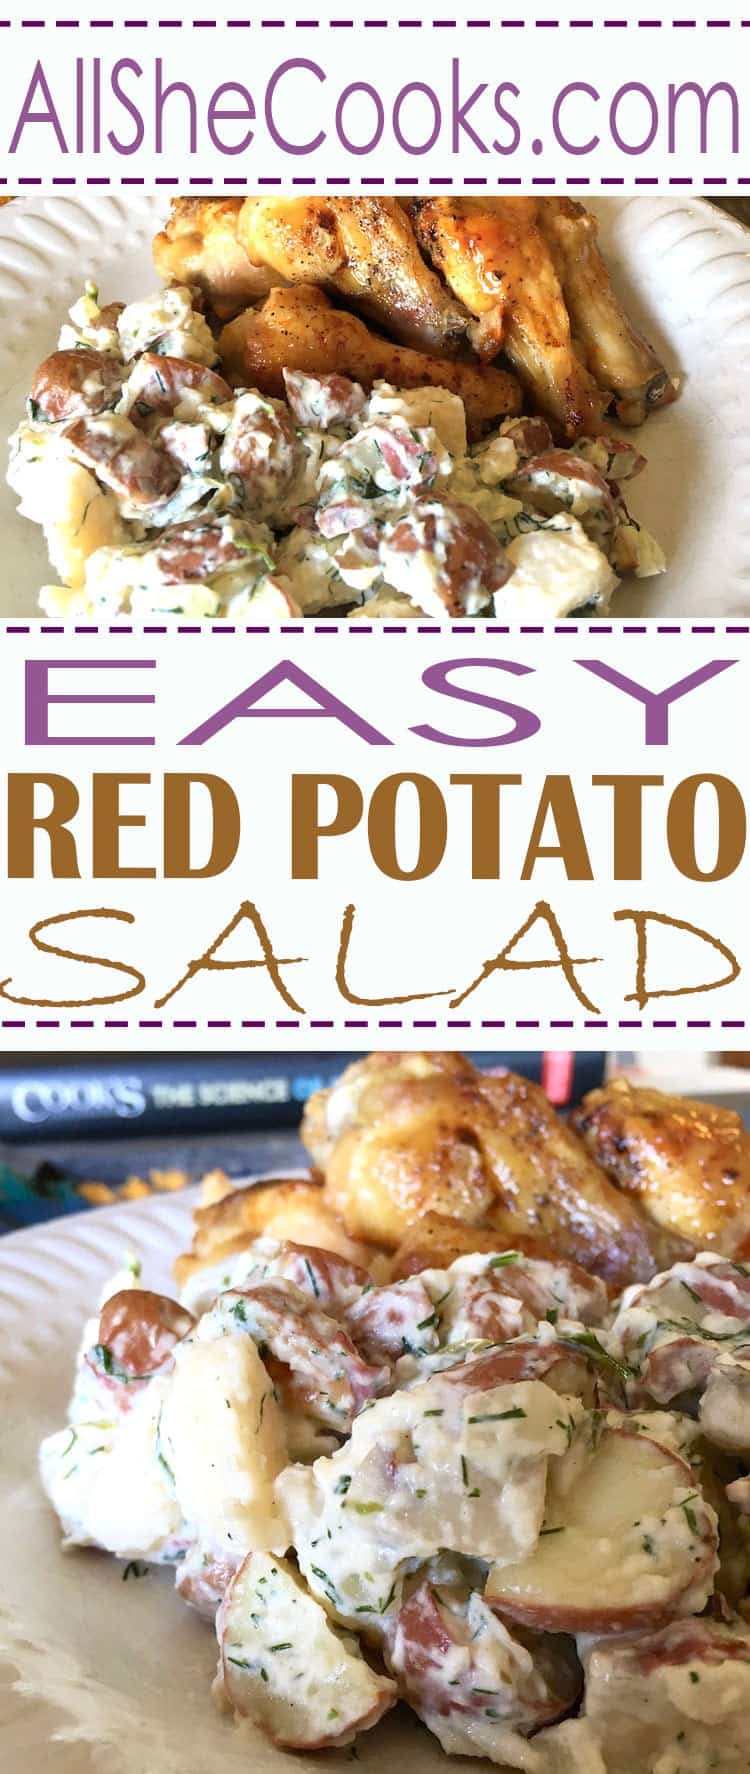 Easy Red Potato Salad is the perfect potato salad to serve with your BBQ or potluck this summer.